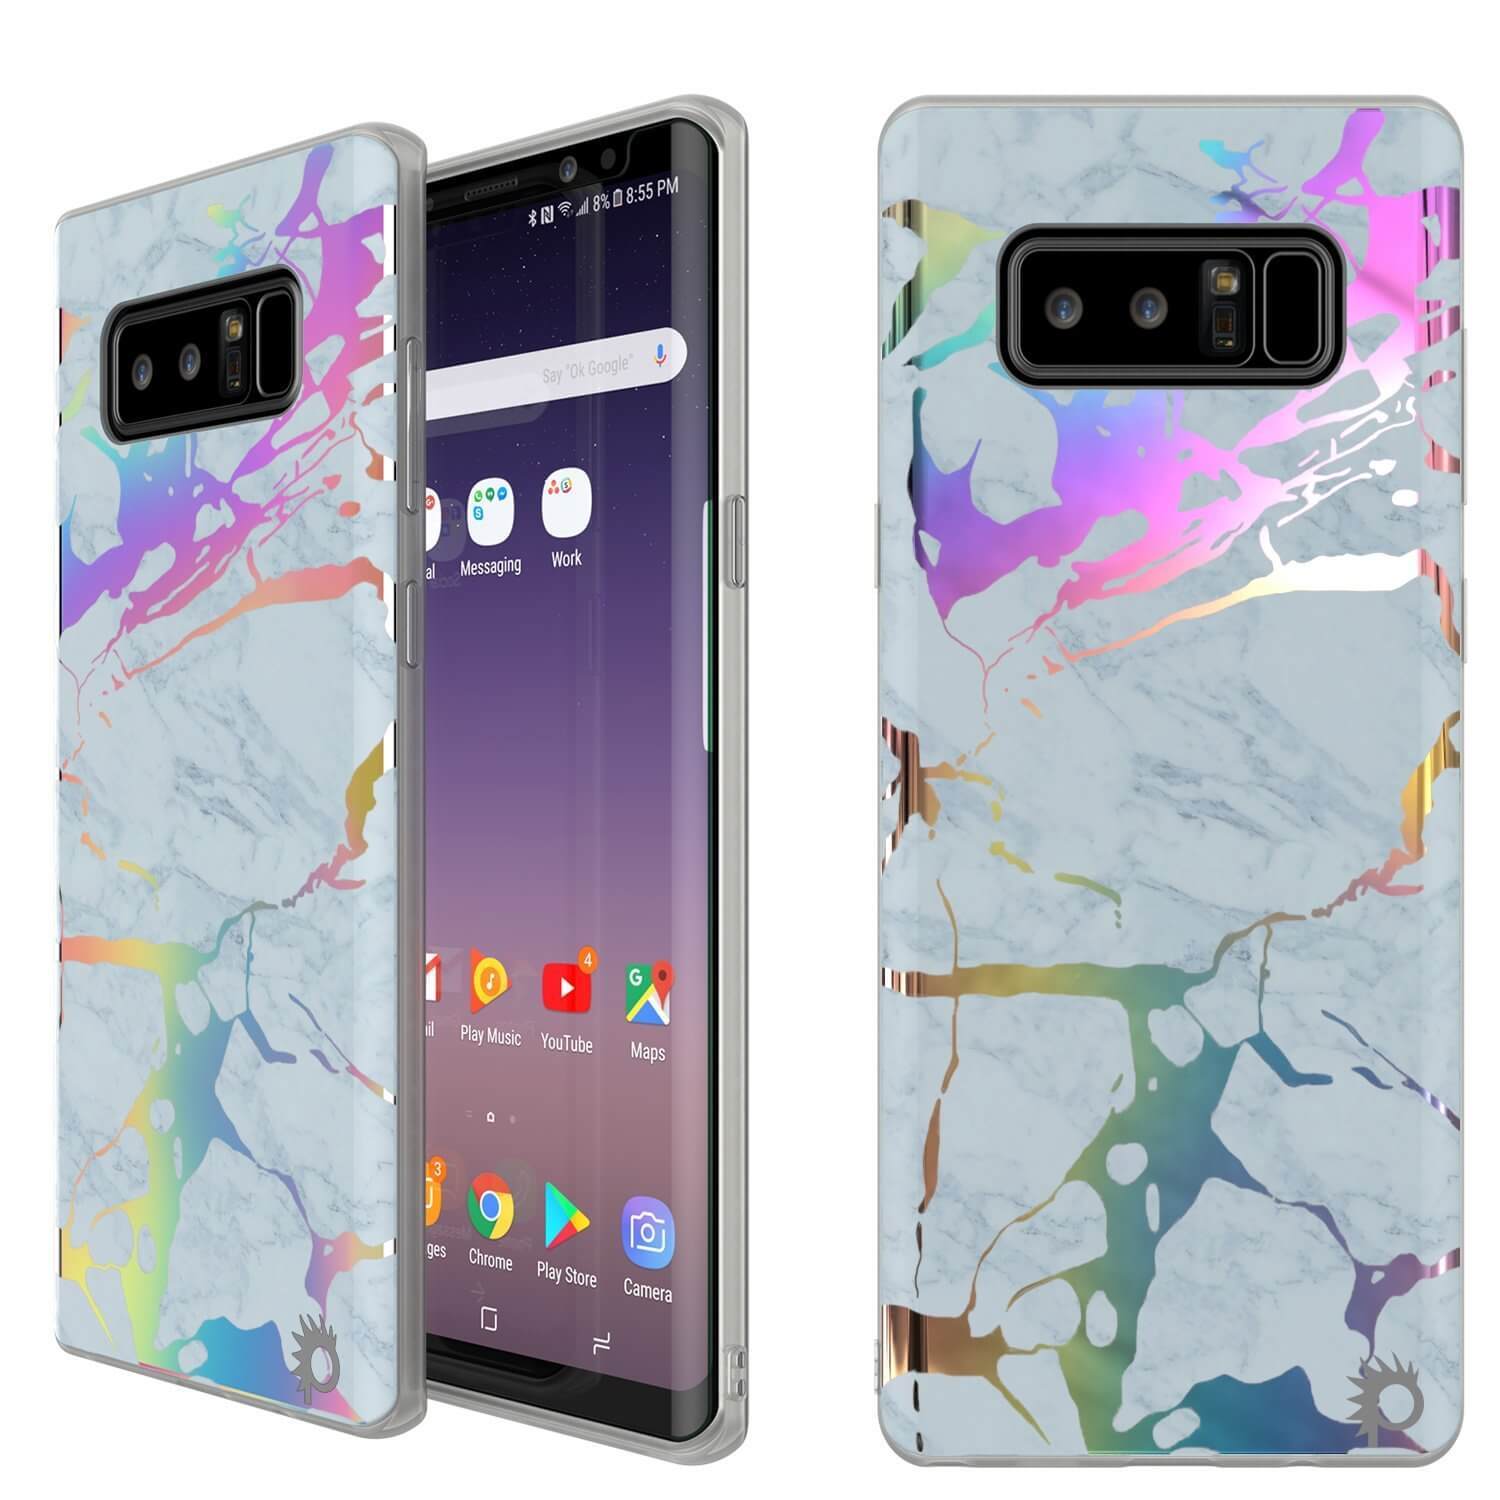 Punkcase Galaxy Note 8 Marble Case, Protective Full Body Cover W/PunkShield Screen Protector (Blue Marmo)